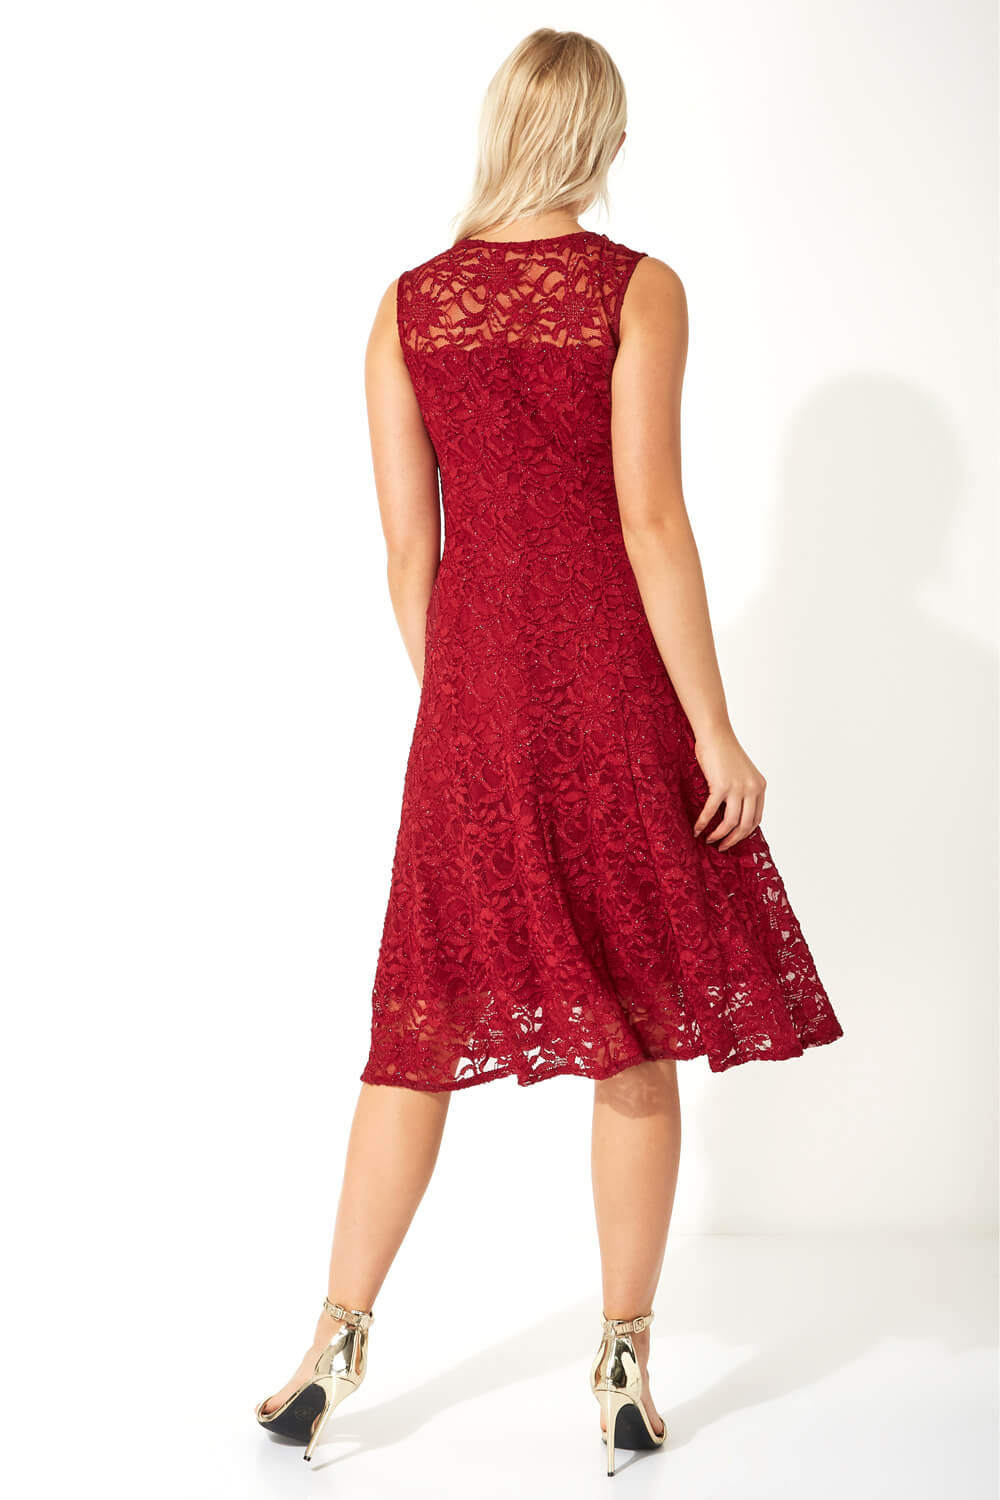 Red Glitter Lace Fit and Flare Dress , Image 3 of 5